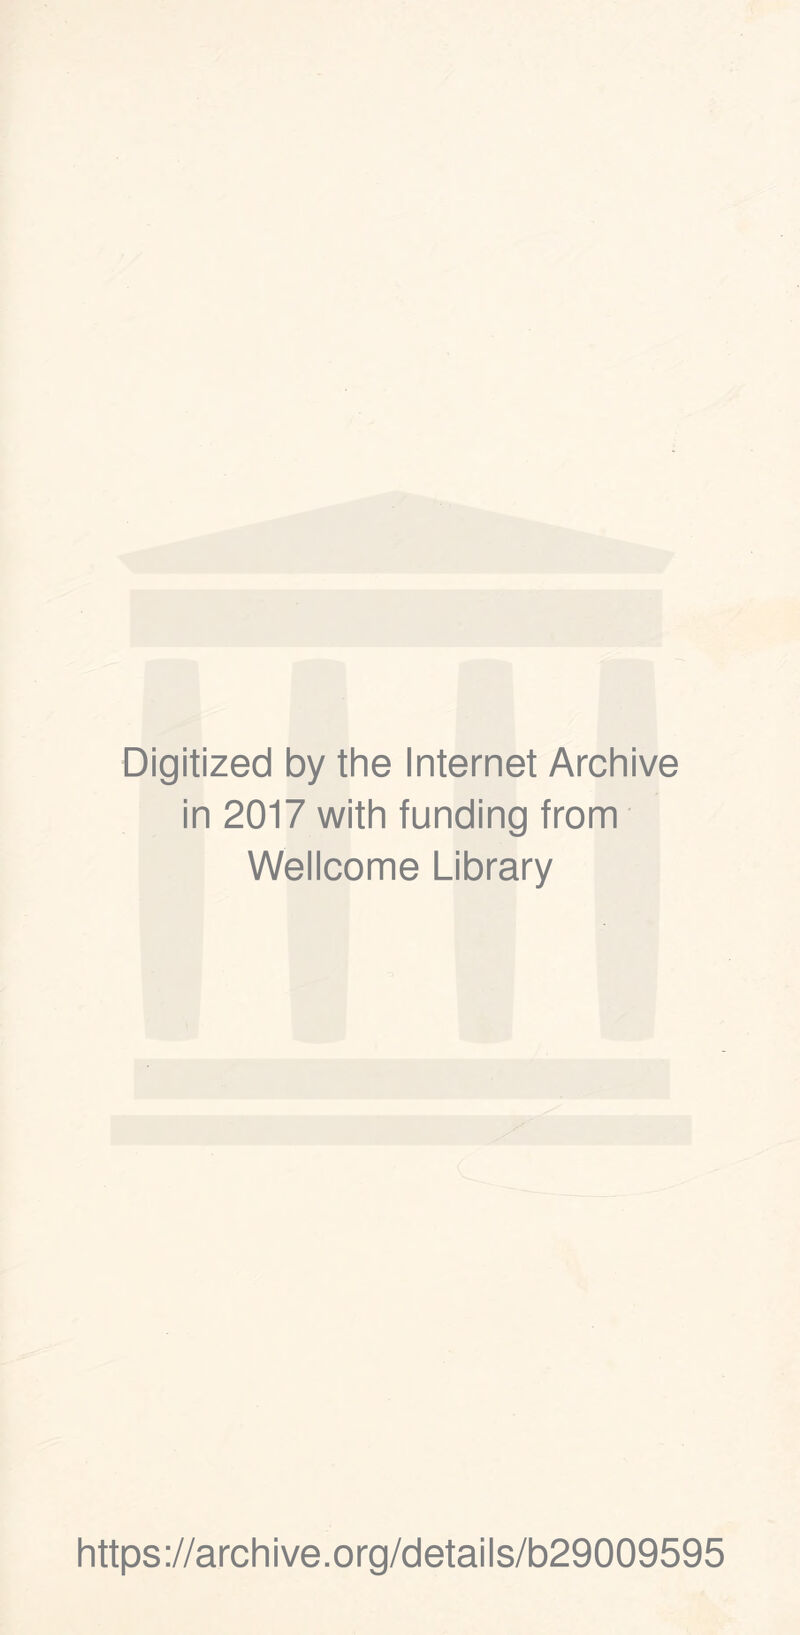 Digitized by the Internet Archive in 2017 with funding from Wellcome Library https://archive.org/details/b29009595